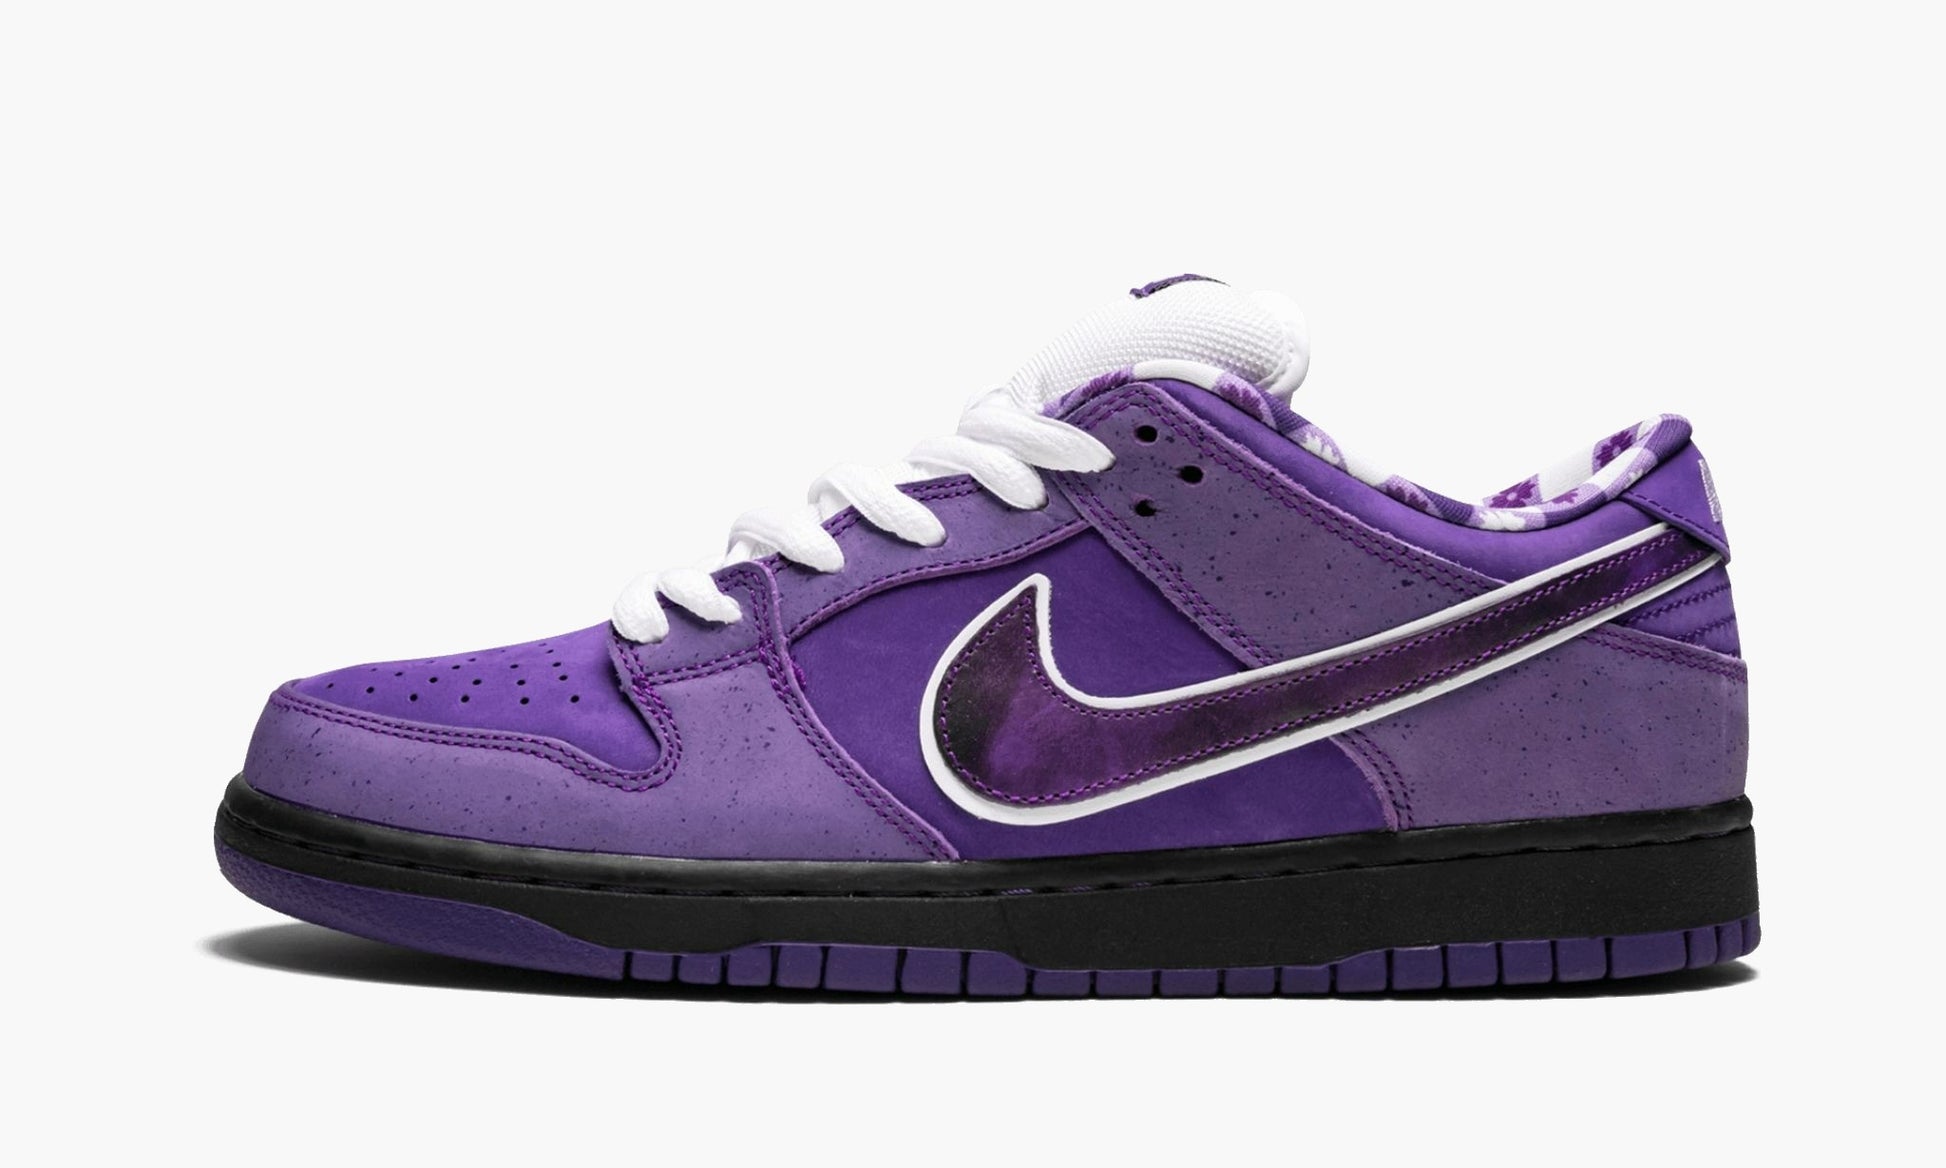 SB Dunk Low Concepts Purple Lobster Special Box - BV1310 555 | The Sortage